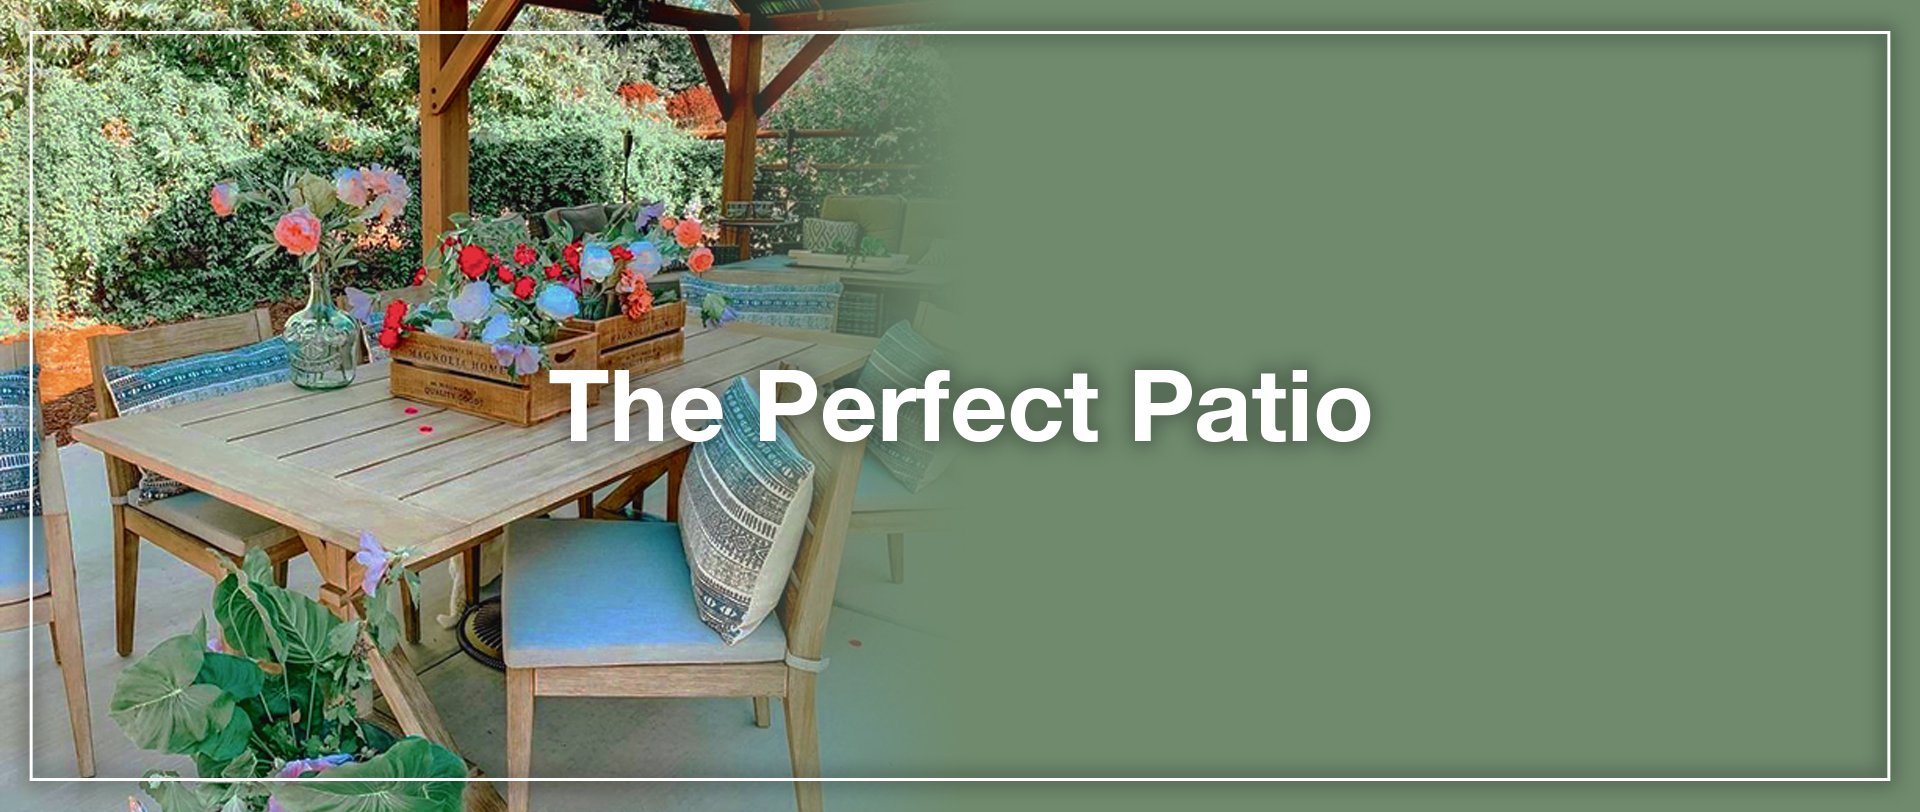 The Perfect Patio